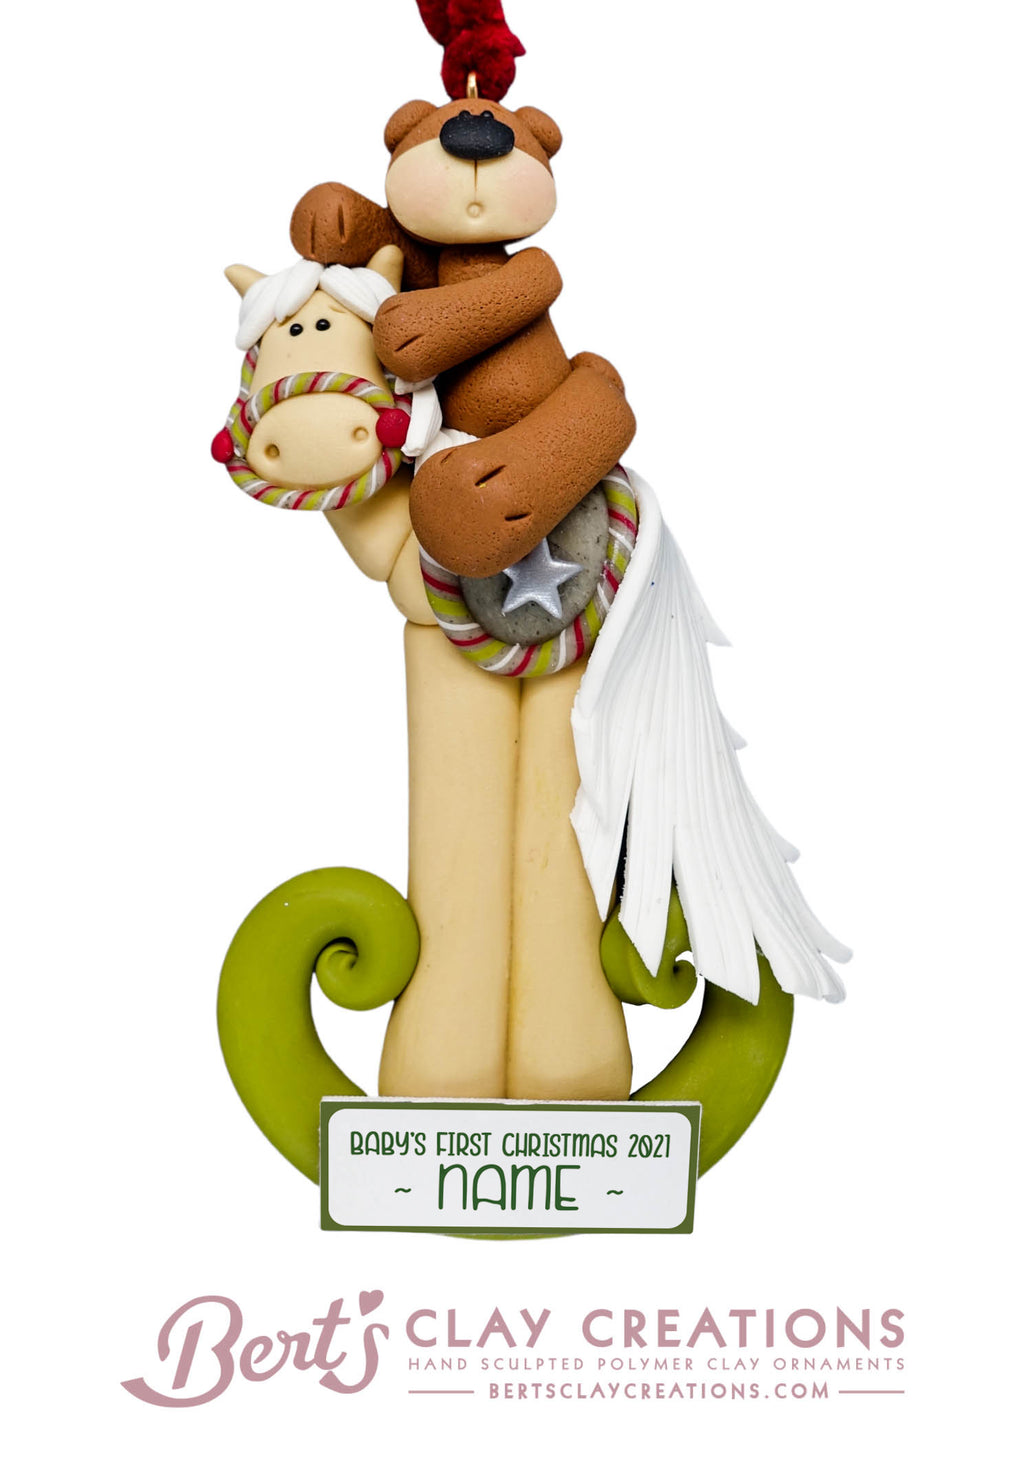 Classic Rocking Horse / Baby's First Christmas Ornament - gender neutral